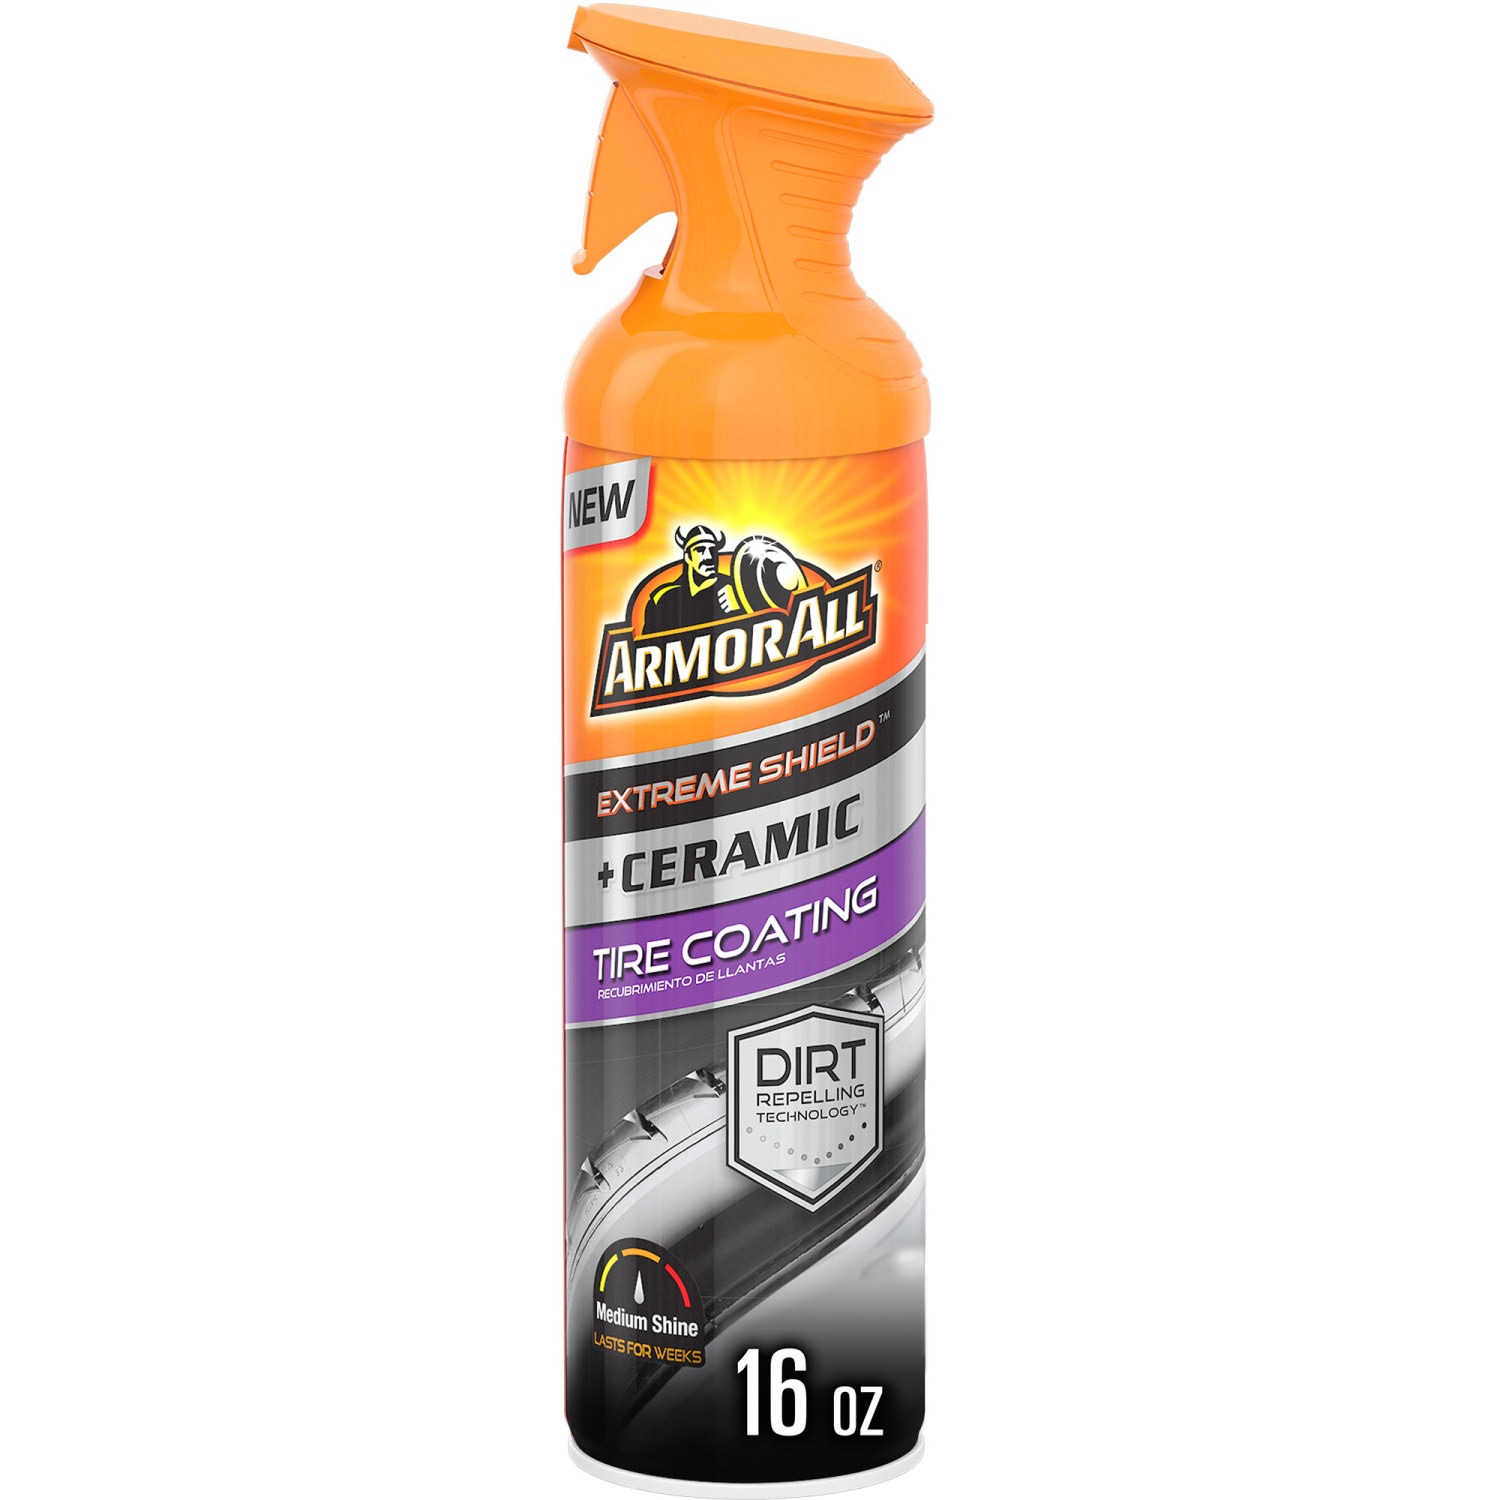 Reviews for Armor All 32 fl. oz. Extreme Wheel and Tire Cleaner